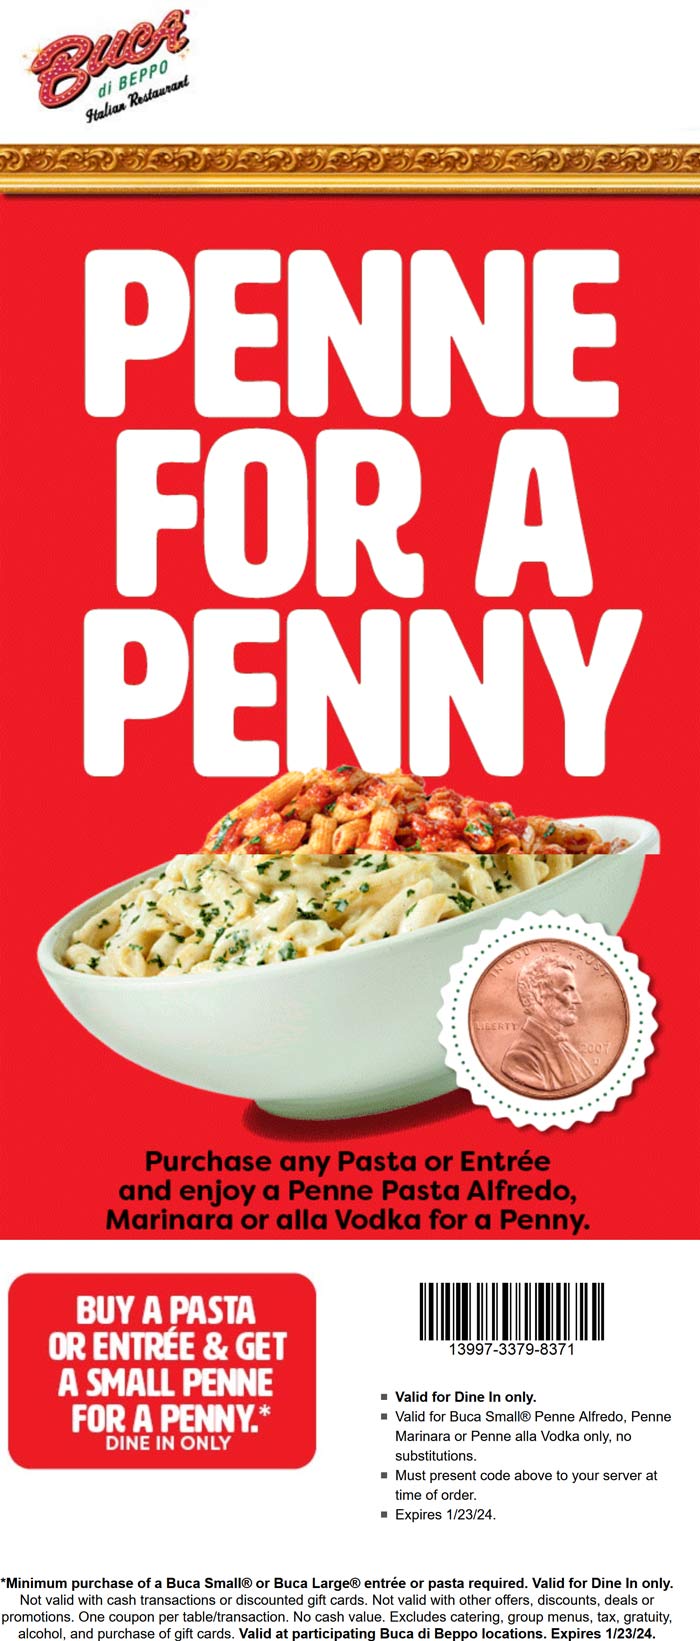 Penne pasta alfredo or marinara for a penny with your entree at Buca di Beppo #bucadibeppo